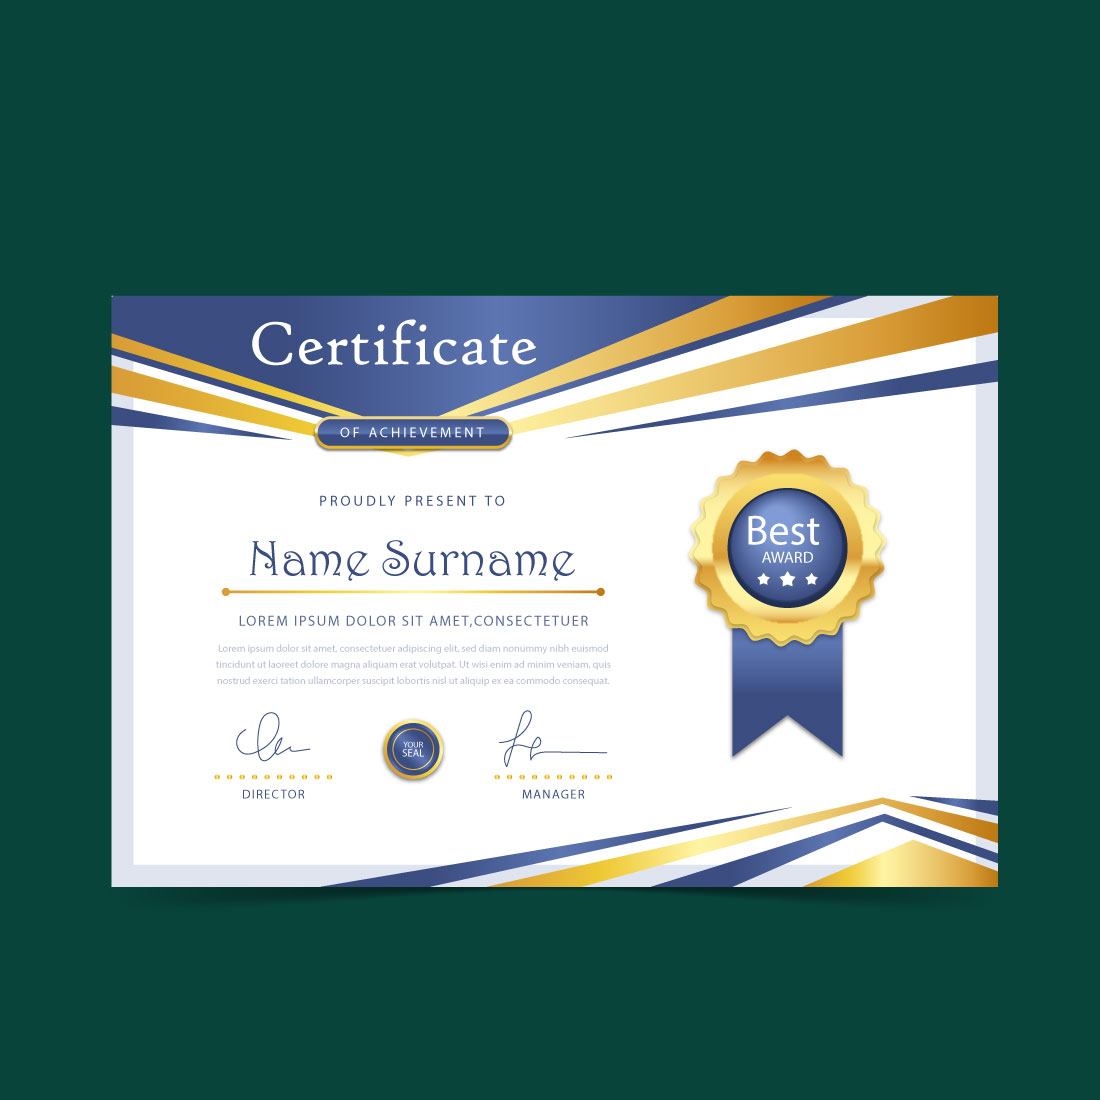 Ranking Certificate Blue and Gold Design cover image.